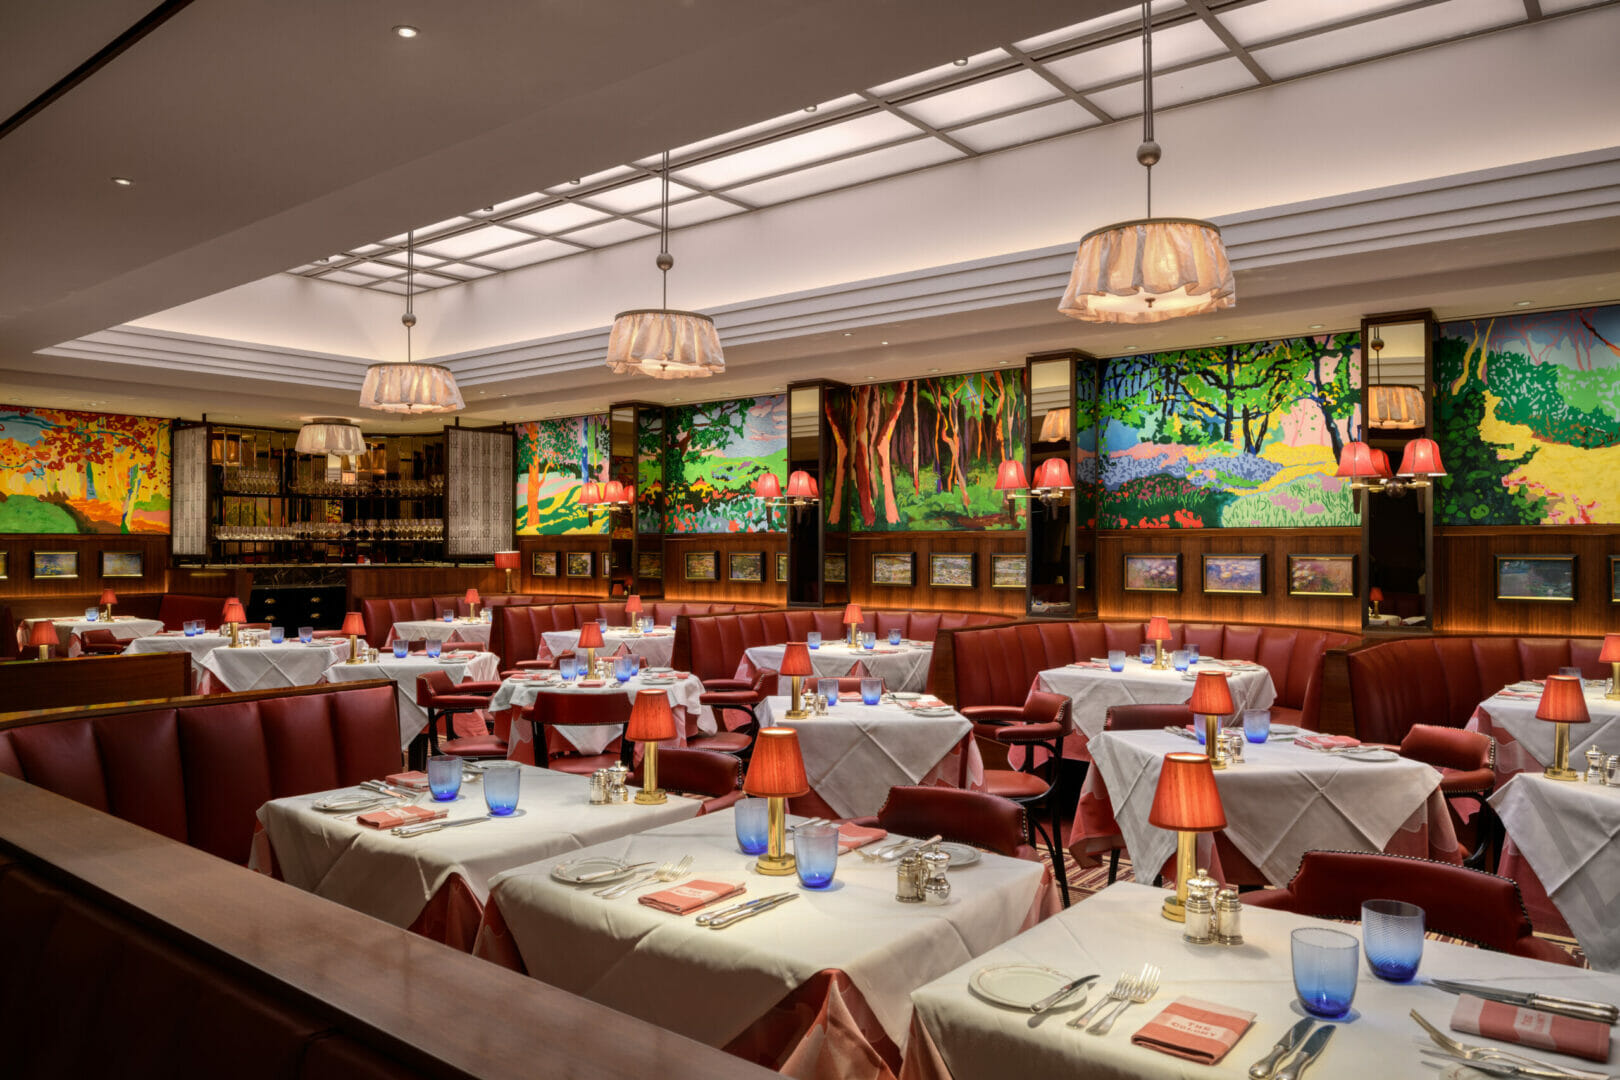 HDR has provided engineering consultancy services for prestigious Mayfair hotel, The Beaumont